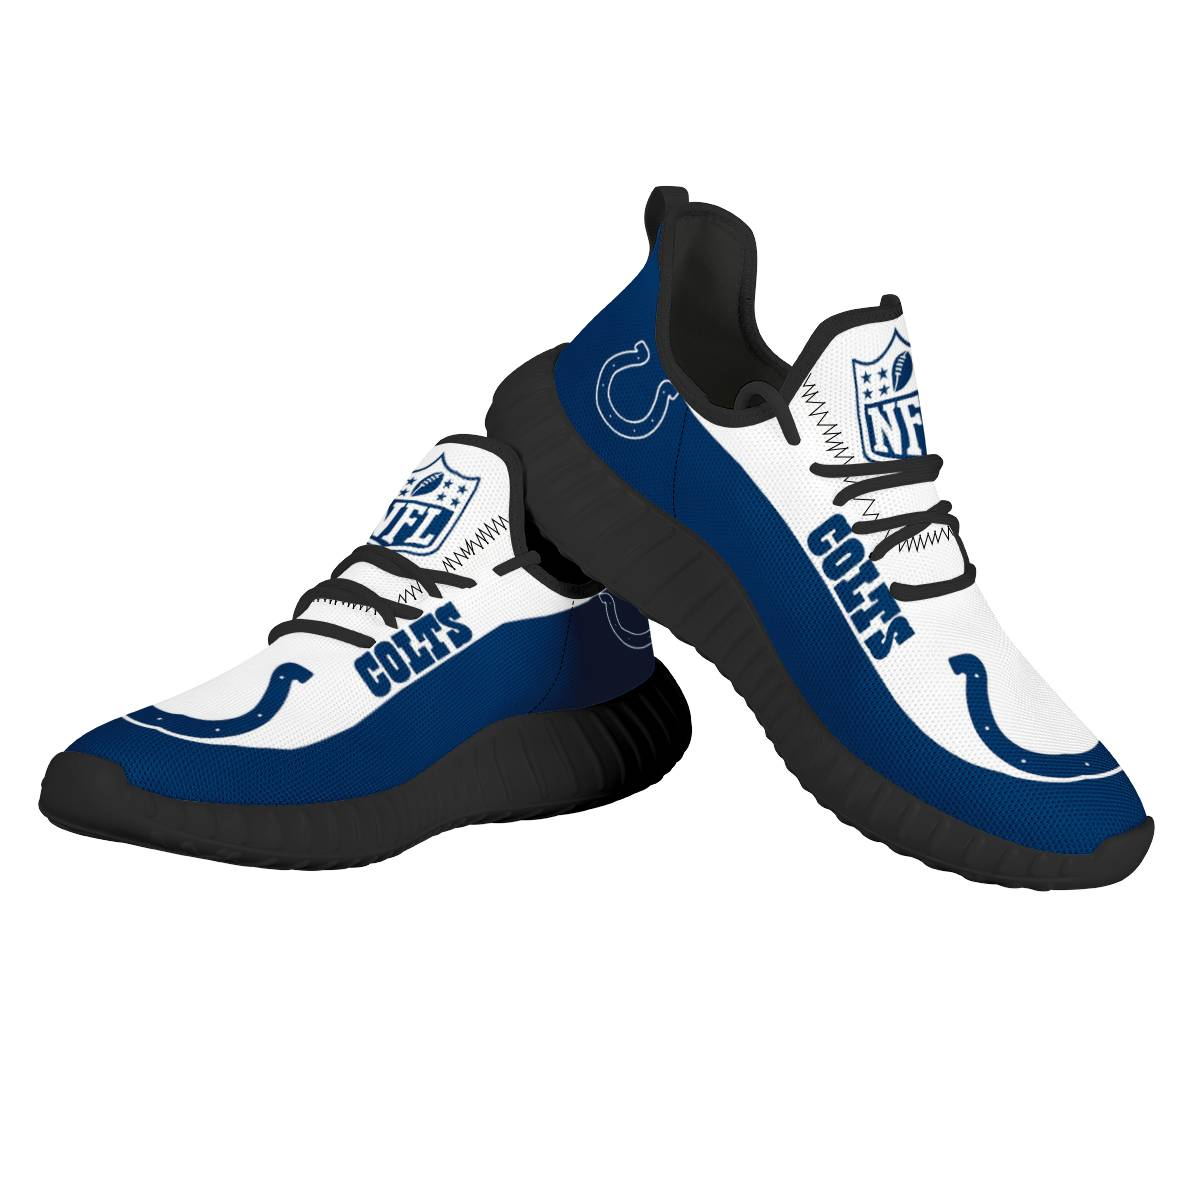 Women's NFL Indianapolis Colts Mesh Knit Sneakers/Shoes 002